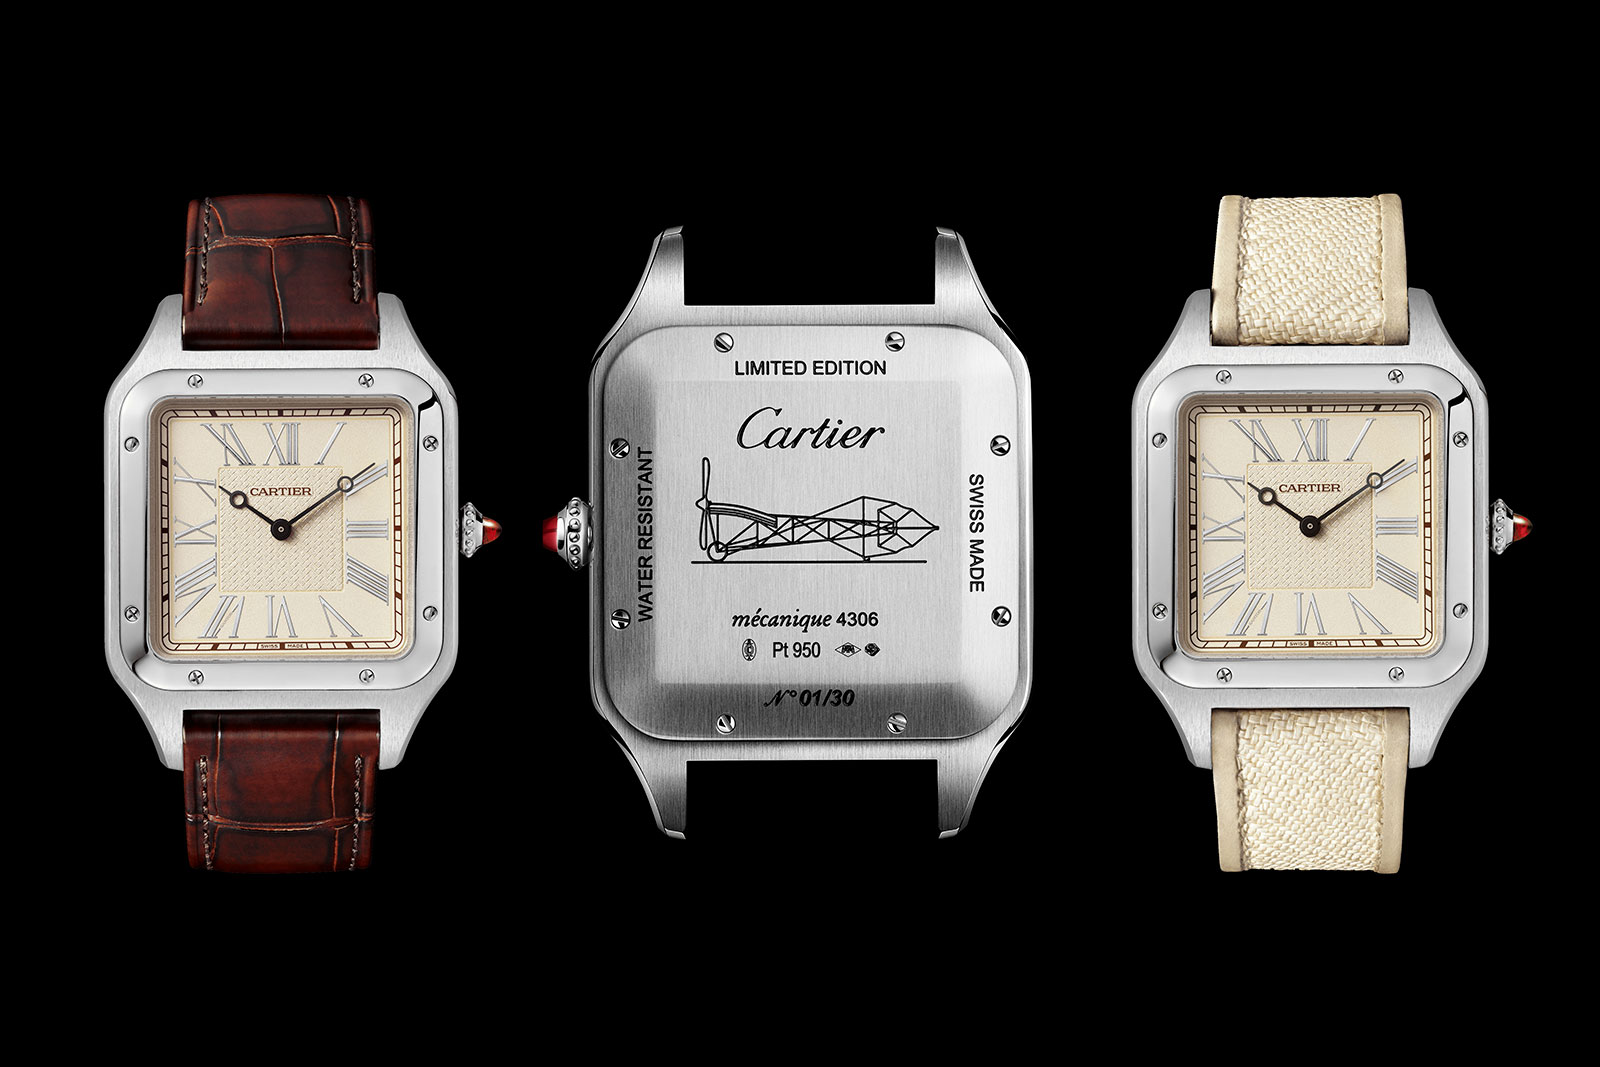 Cartier Introduces the Santos-Dumont Limited Editions | SJX Watches